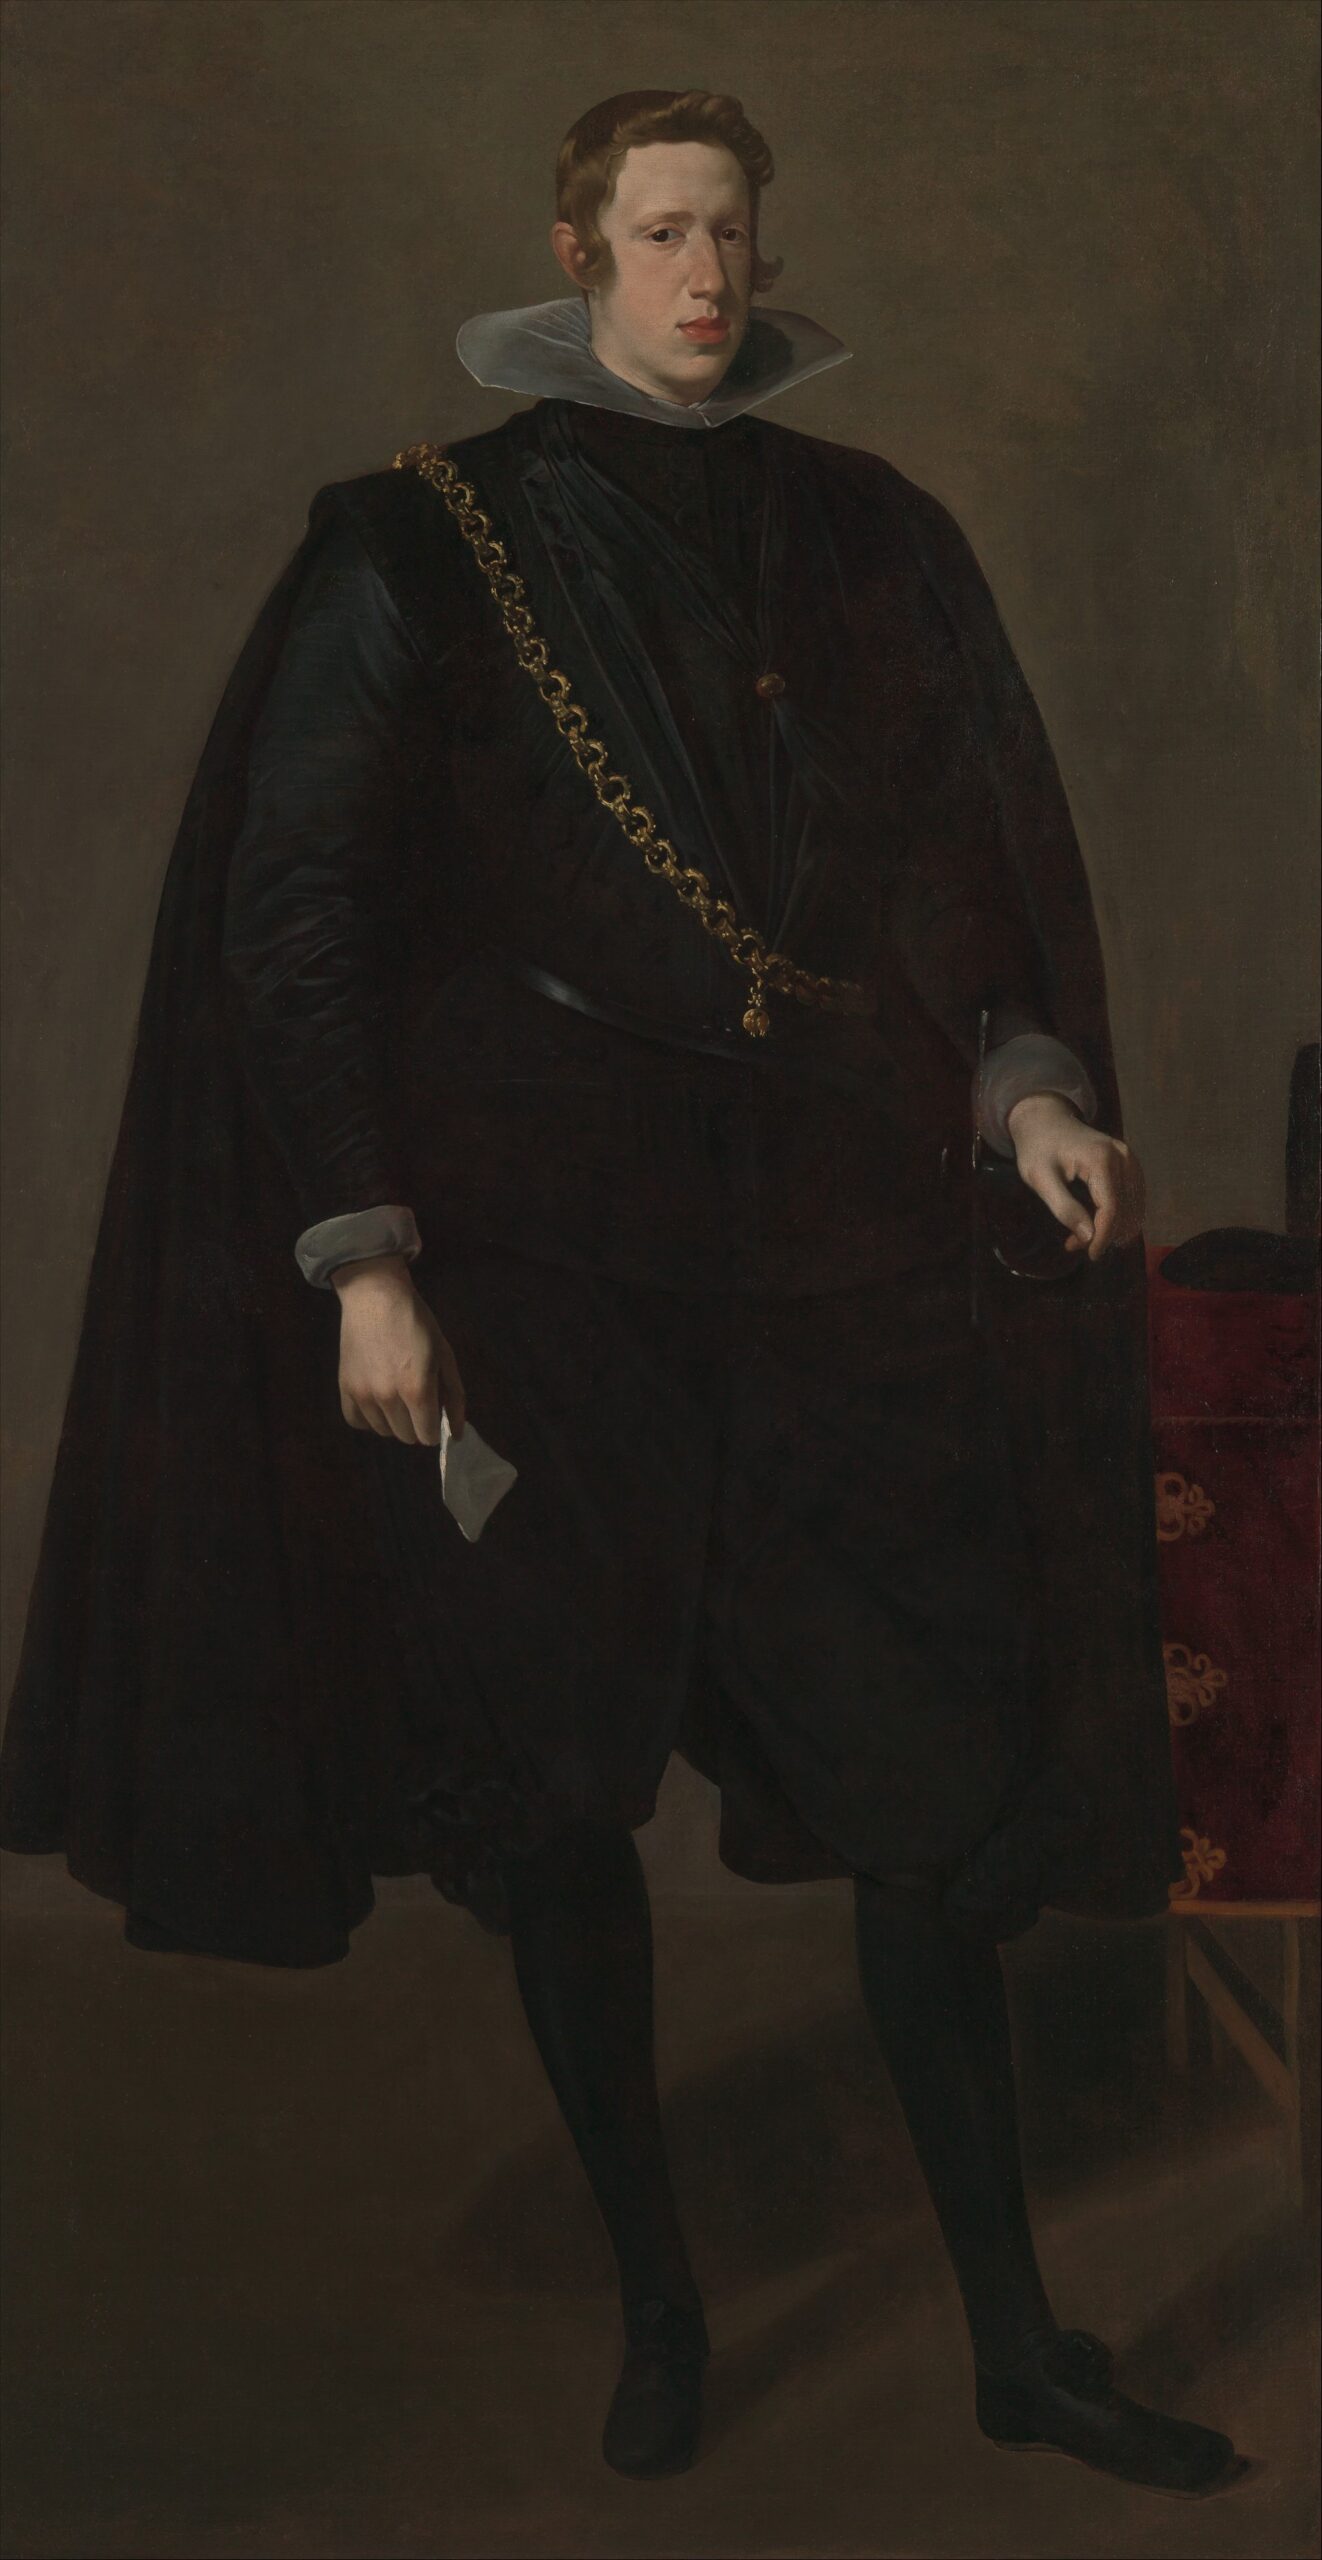 Velázquez’s painting of King Philip IV of Spain that served as a companion piece to his wife’s portrait until Napoleon’s invasion